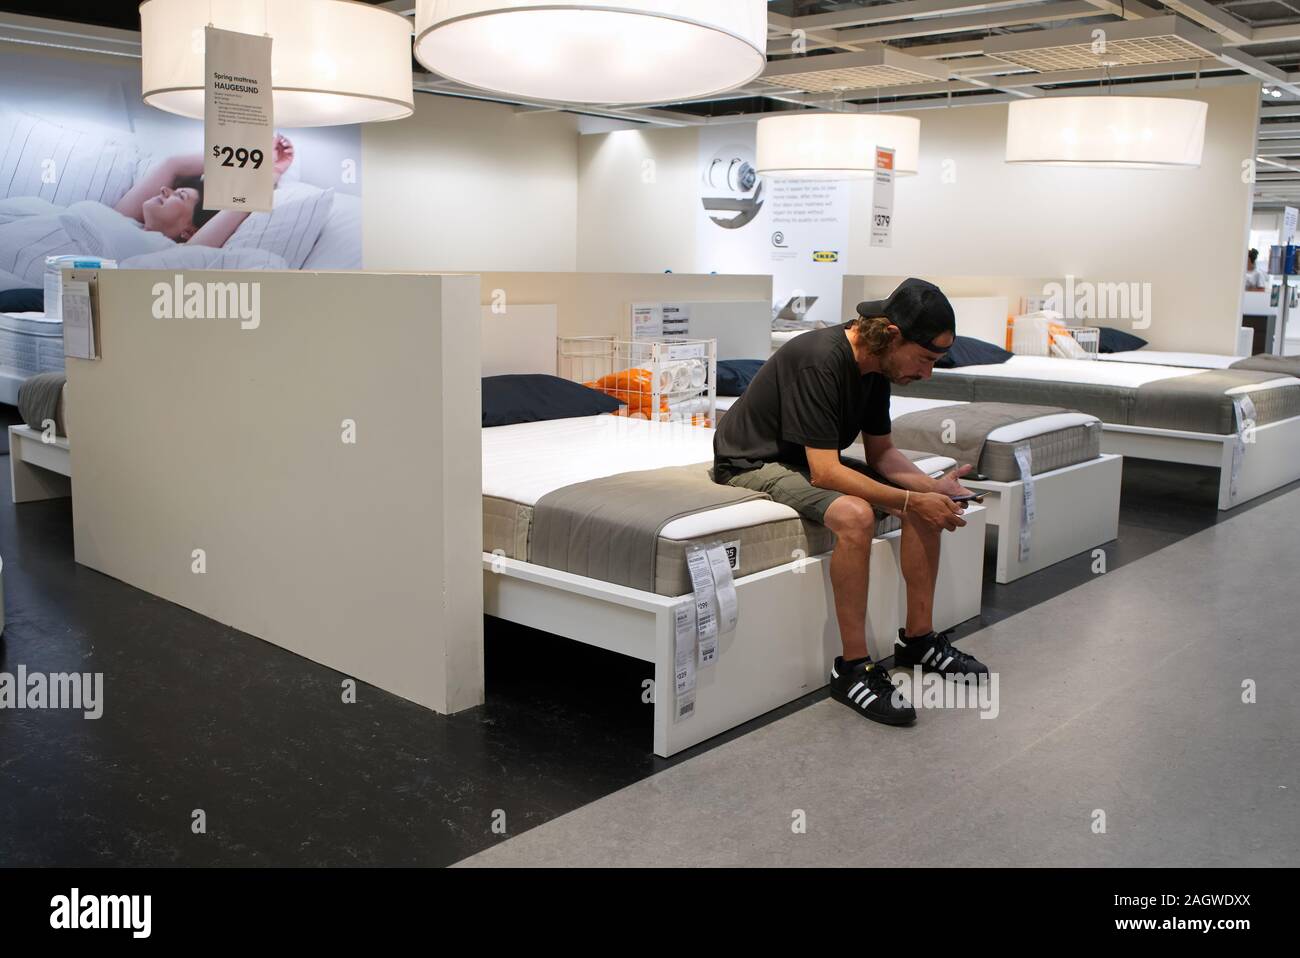 New Haven, CT USA. Sep 2018. Man sitting on display bed surfing on smartphone at world famous IKEA home furnishings outlet. Stock Photo